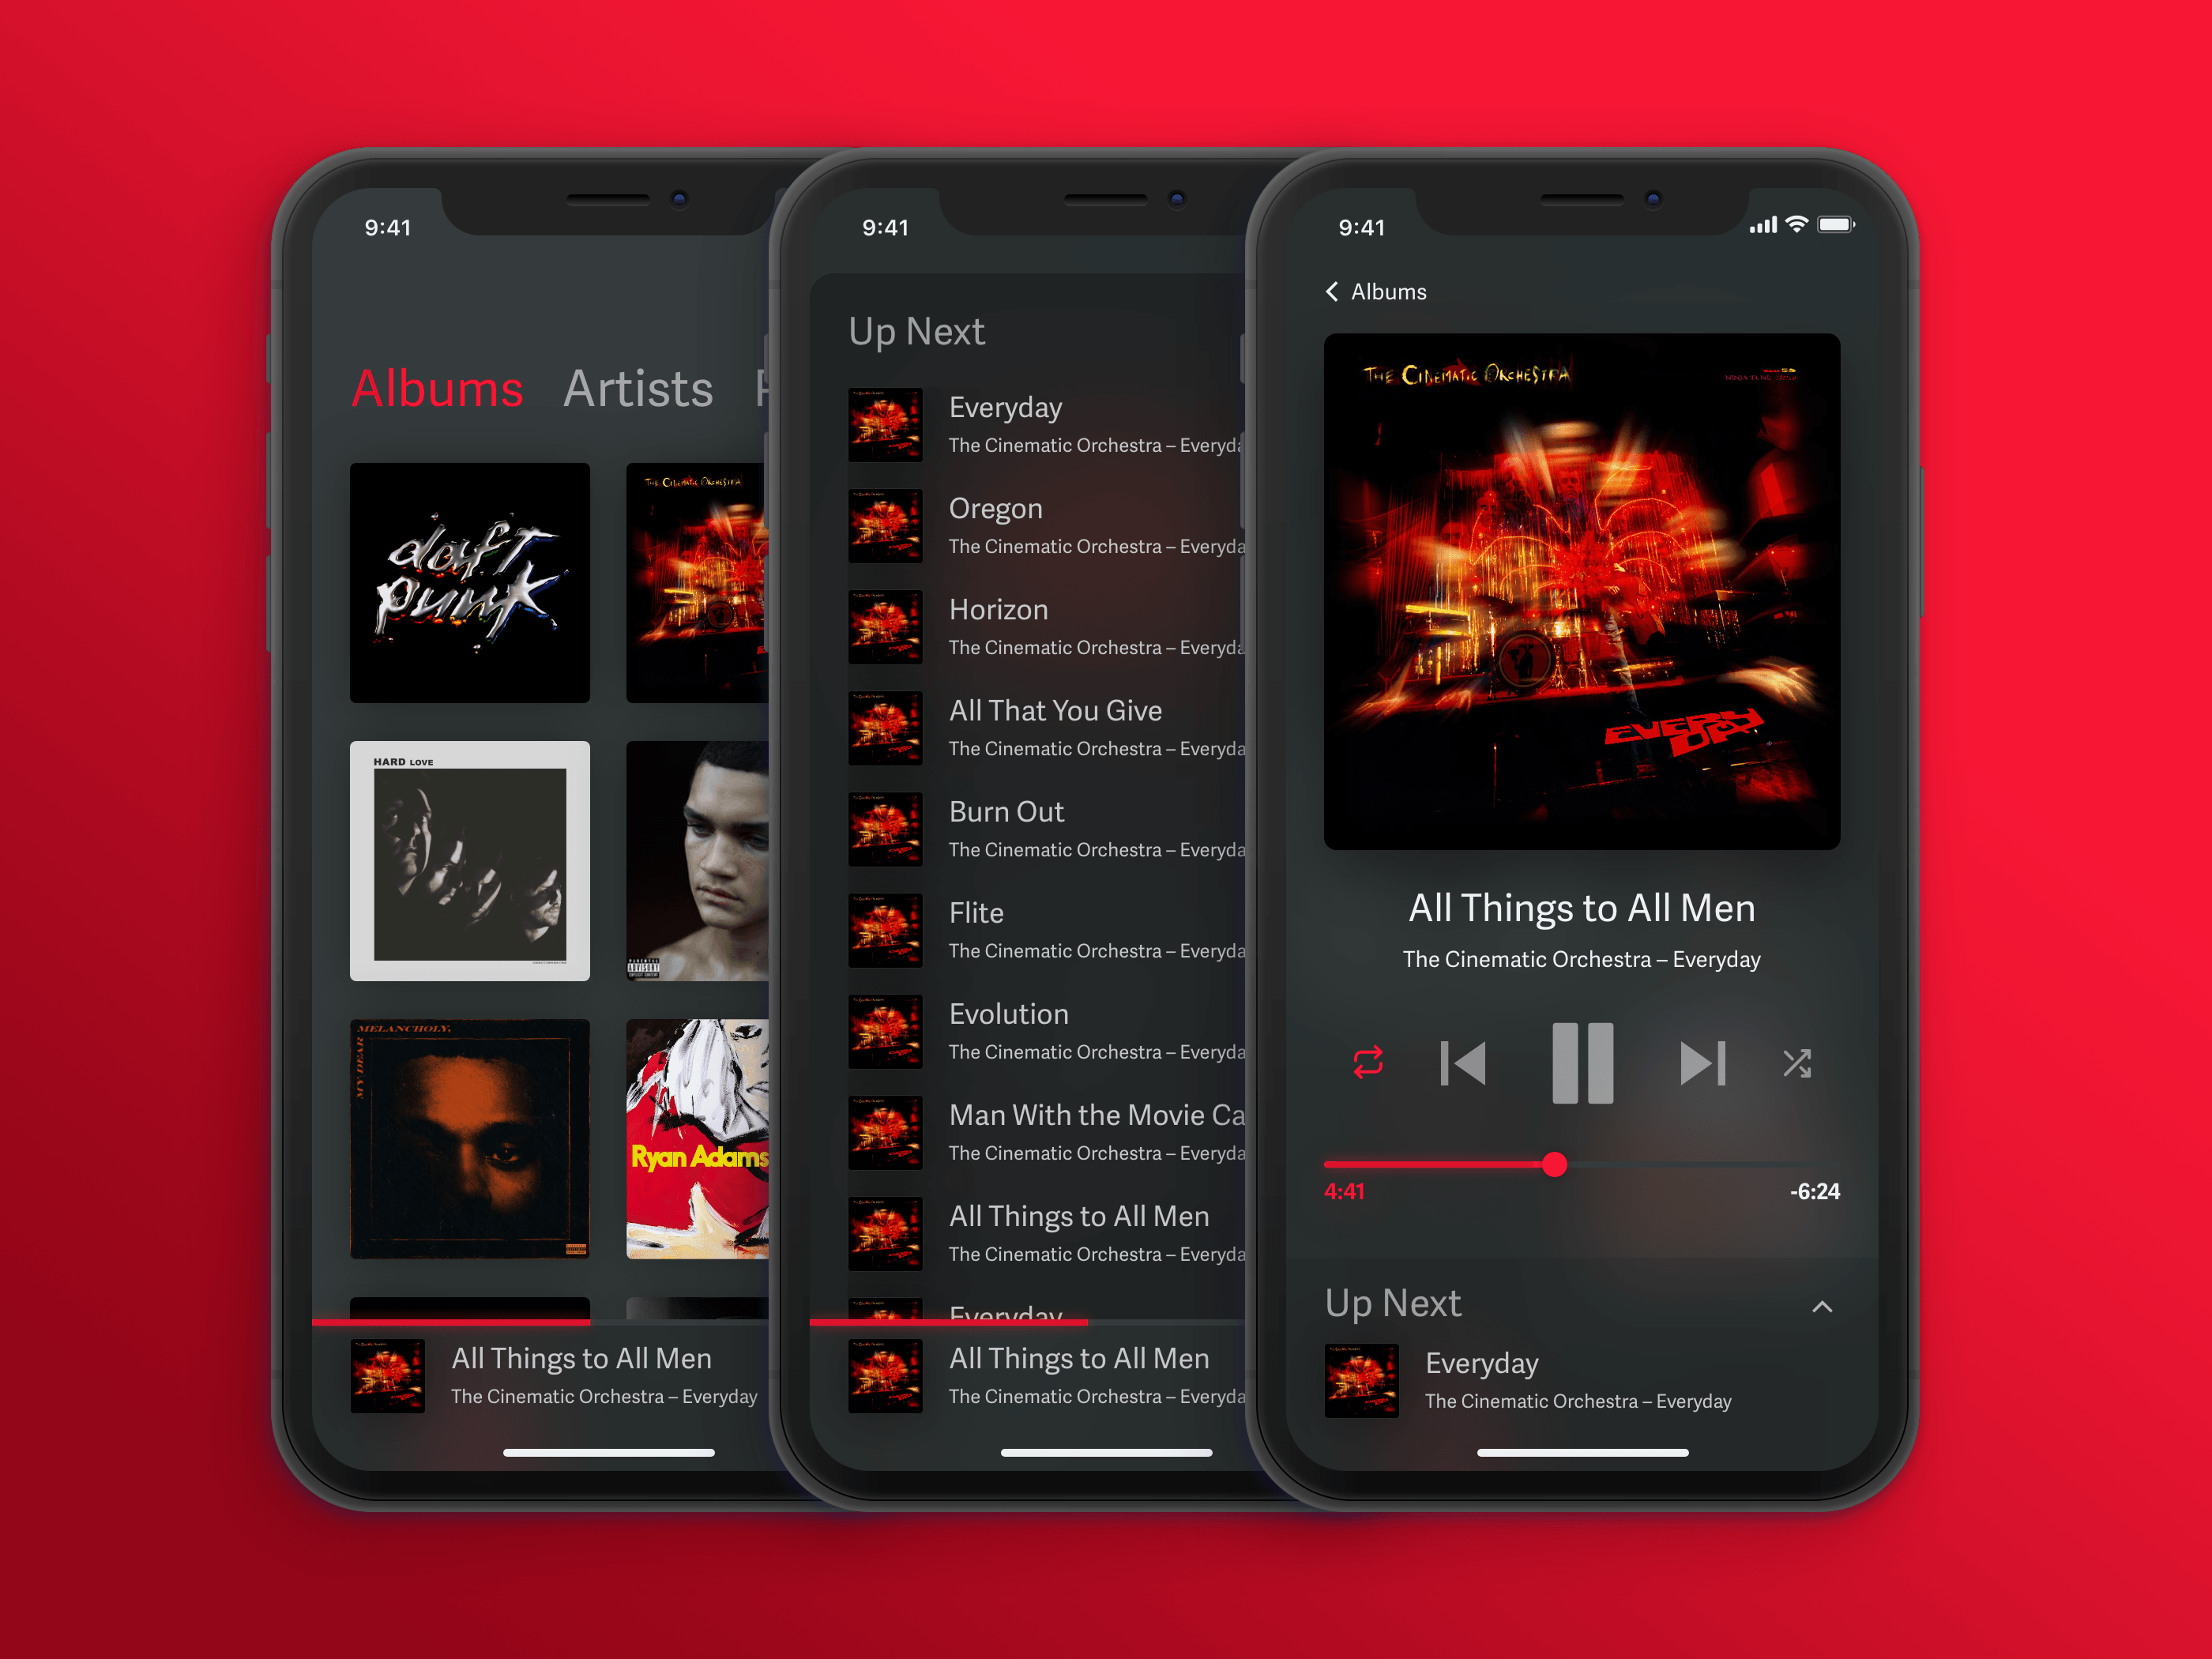 An iPhone music app design shown on three different iPhone screens in different visual states.